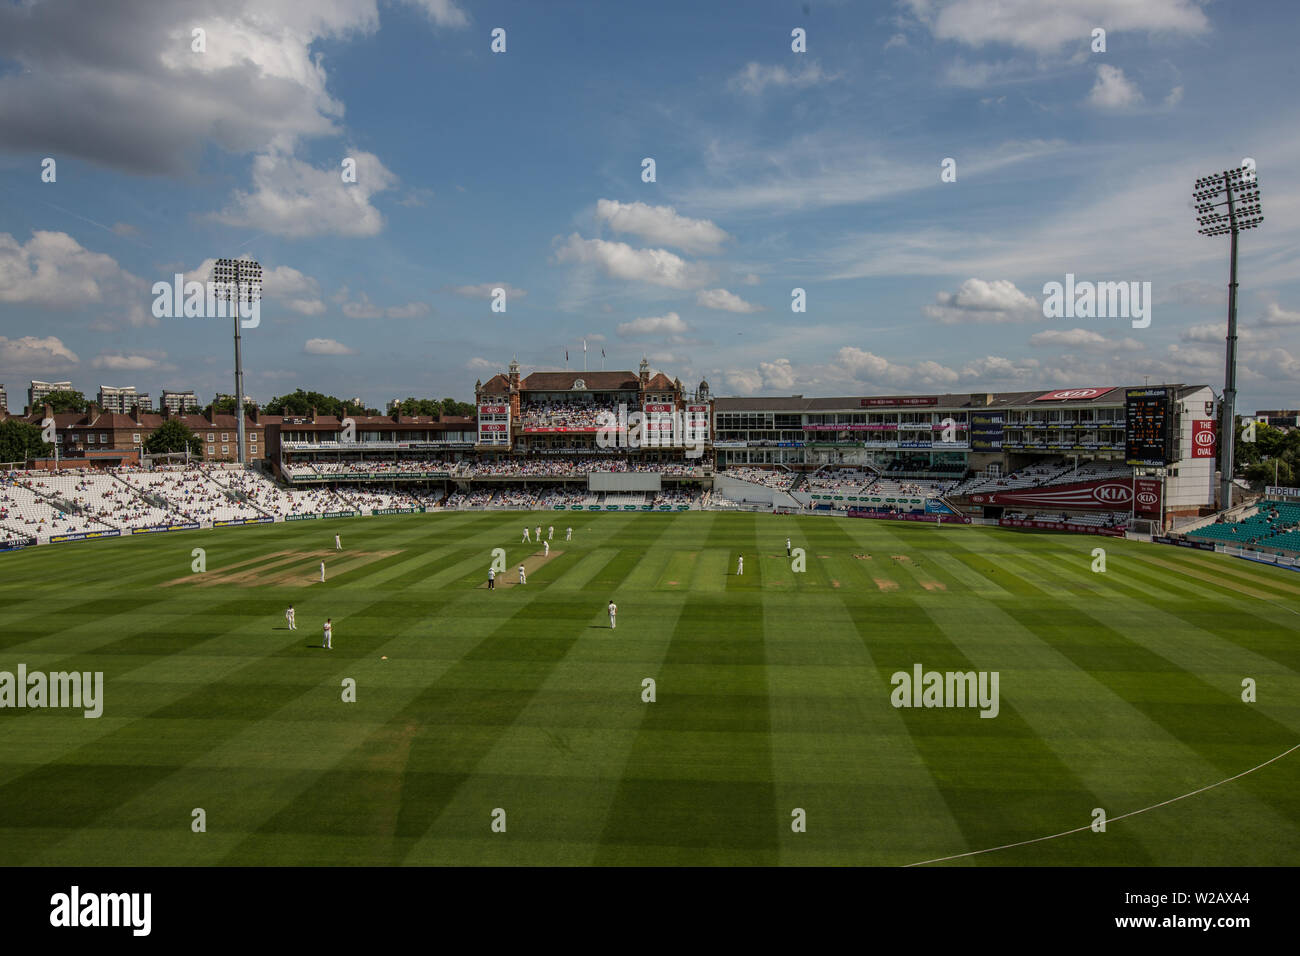 London, UK. 7 July, 2019.  Kent in the field  with the Micky Stewart Members' Pavilion in the background on the first day of the Specsavers County Championship game between Surrey and Kent at the Kia Oval. David Rowe/Alamy Live News Stock Photo